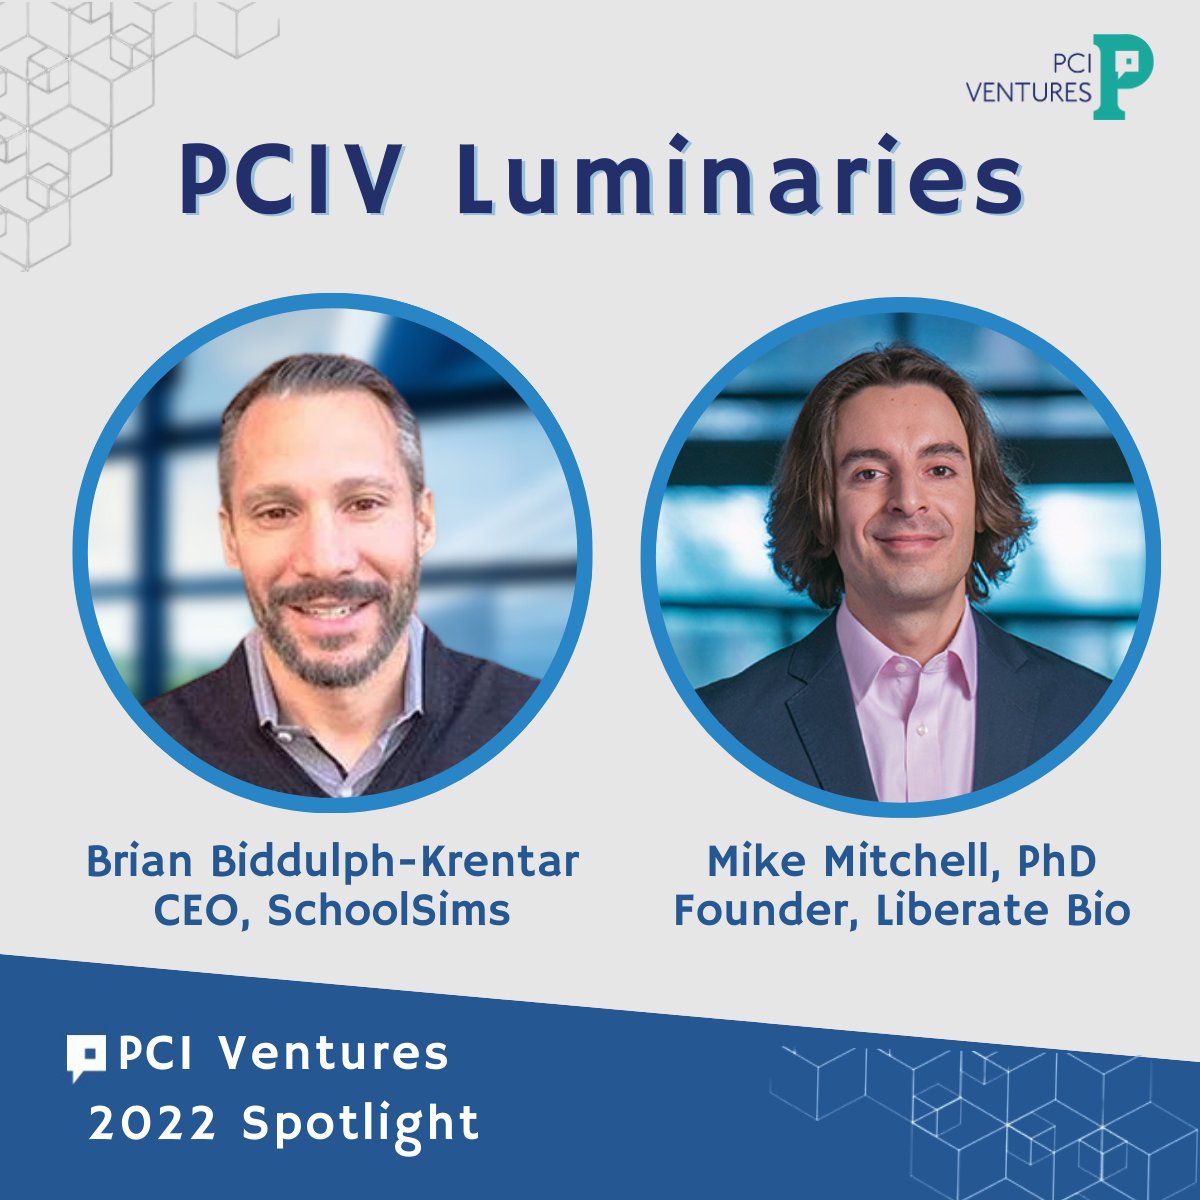 The PCIV Luminaries are selected each year based on their exemplary entrepreneurial spirit. The 2022 PCIV Luminaries are Brian Biddulph-Krentar, CEO of @SchoolSimsPD, & @MJMitchell_Lab, PhD Founder of Liberate Bio. Read their full features here: bit.ly/PCIVSpotlight2…